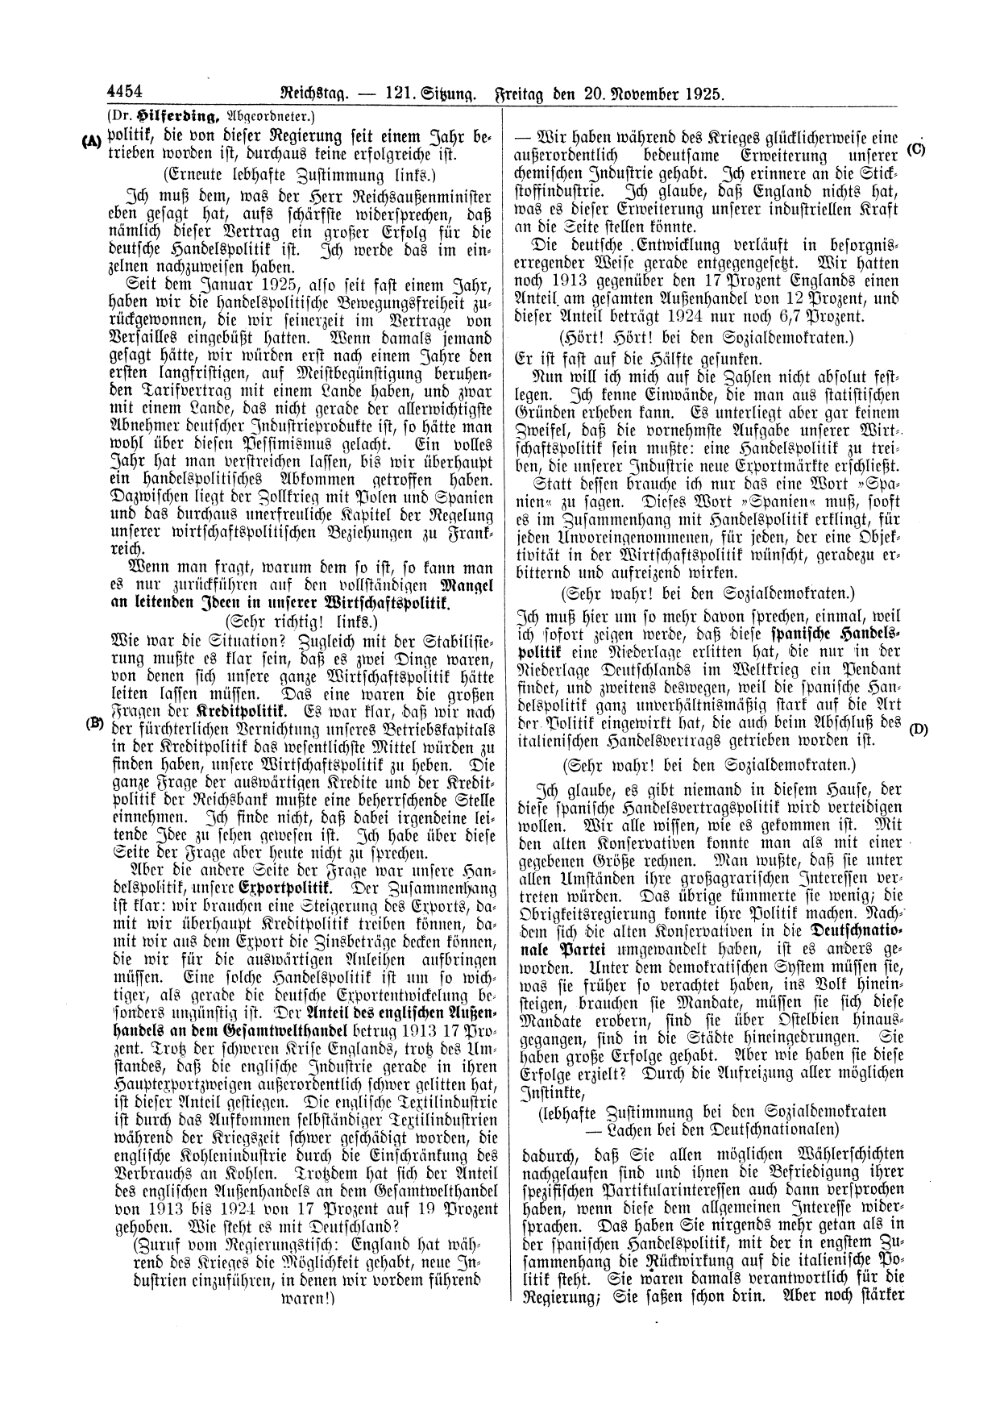 Scan of page 4454